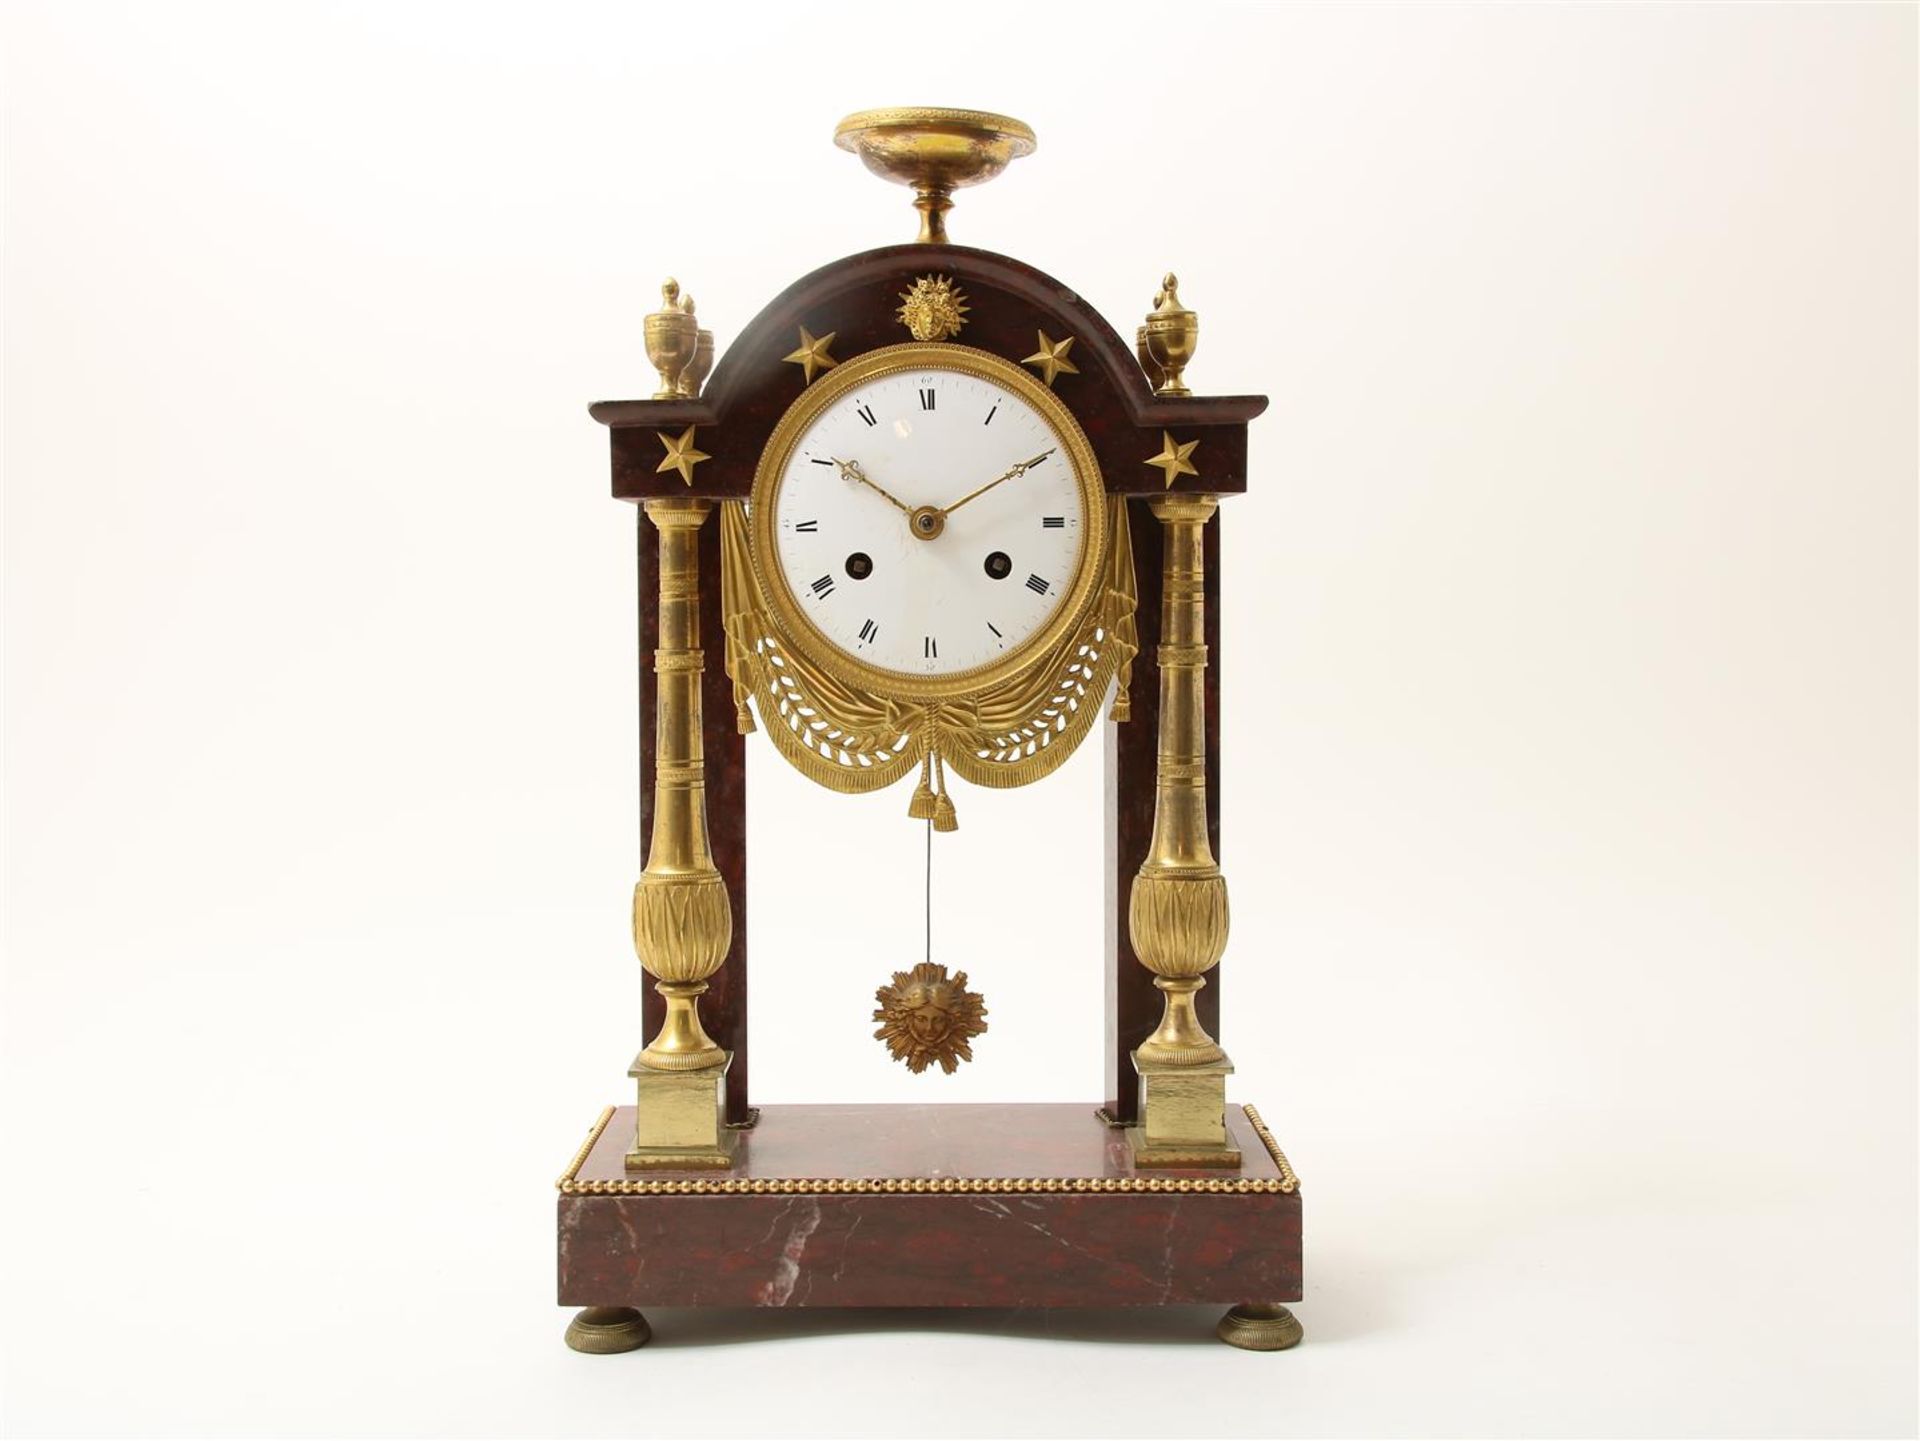 Red marble -Griotte marble- Empire portal mantel clock (Pendule portique) with ormolu ornaments,